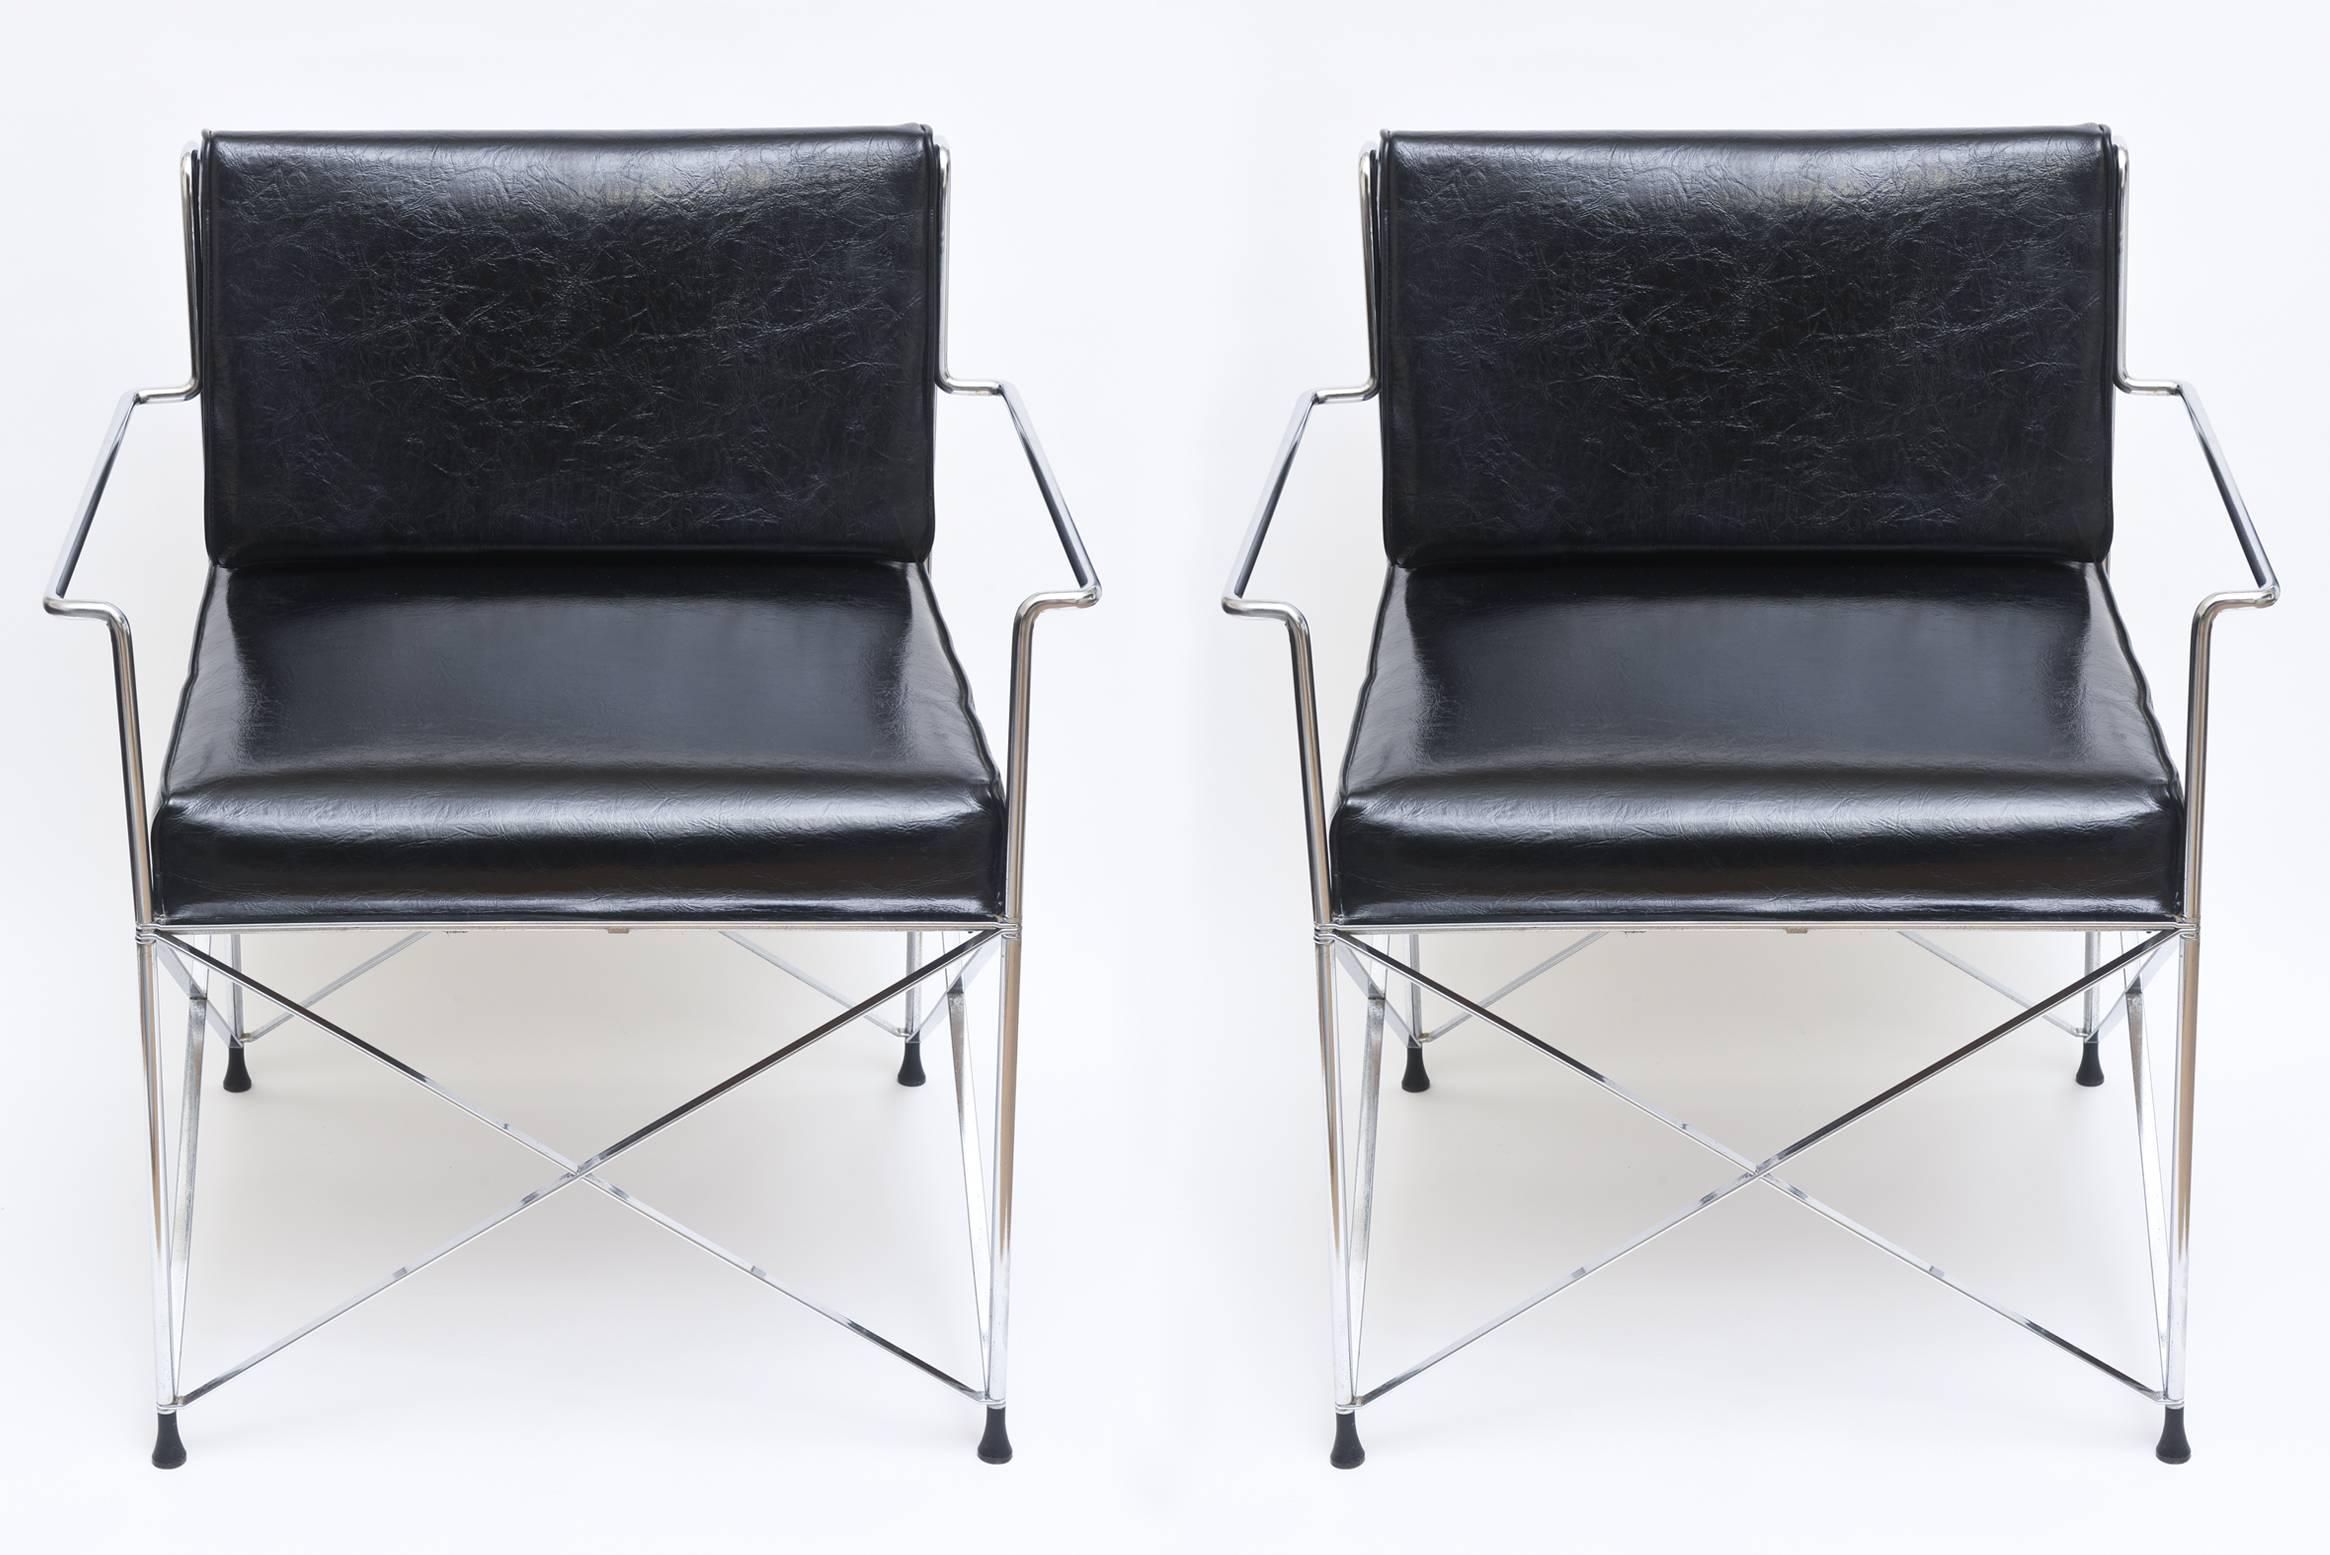 These unusual DIA; Design Institute of America chrome x frame side or lounge chairs have the original rubber tips for the bottom. The original black vinyl remains. You may want to do your own upholstery. The original chrome frames remains. These